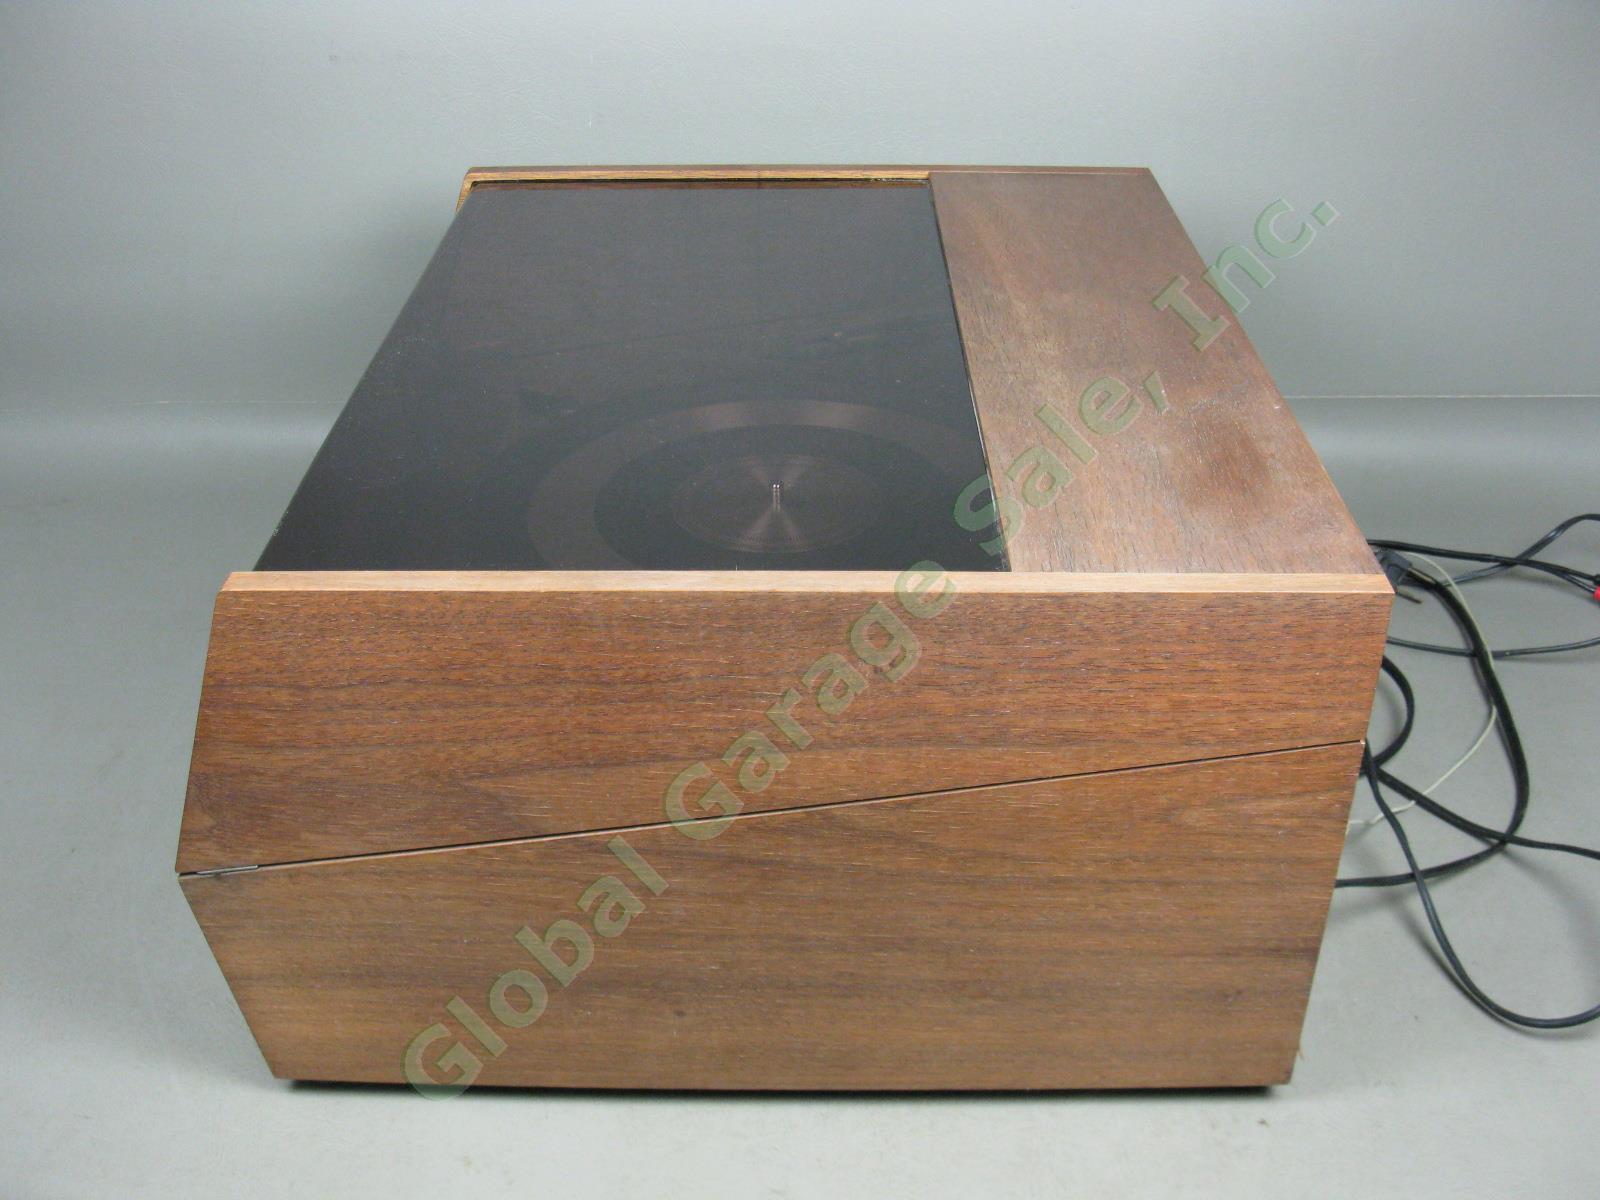 Vtg Dual 1219 Turntable + Wood Plinth Dust Cover Display Cabinet Case Manual Lot 7